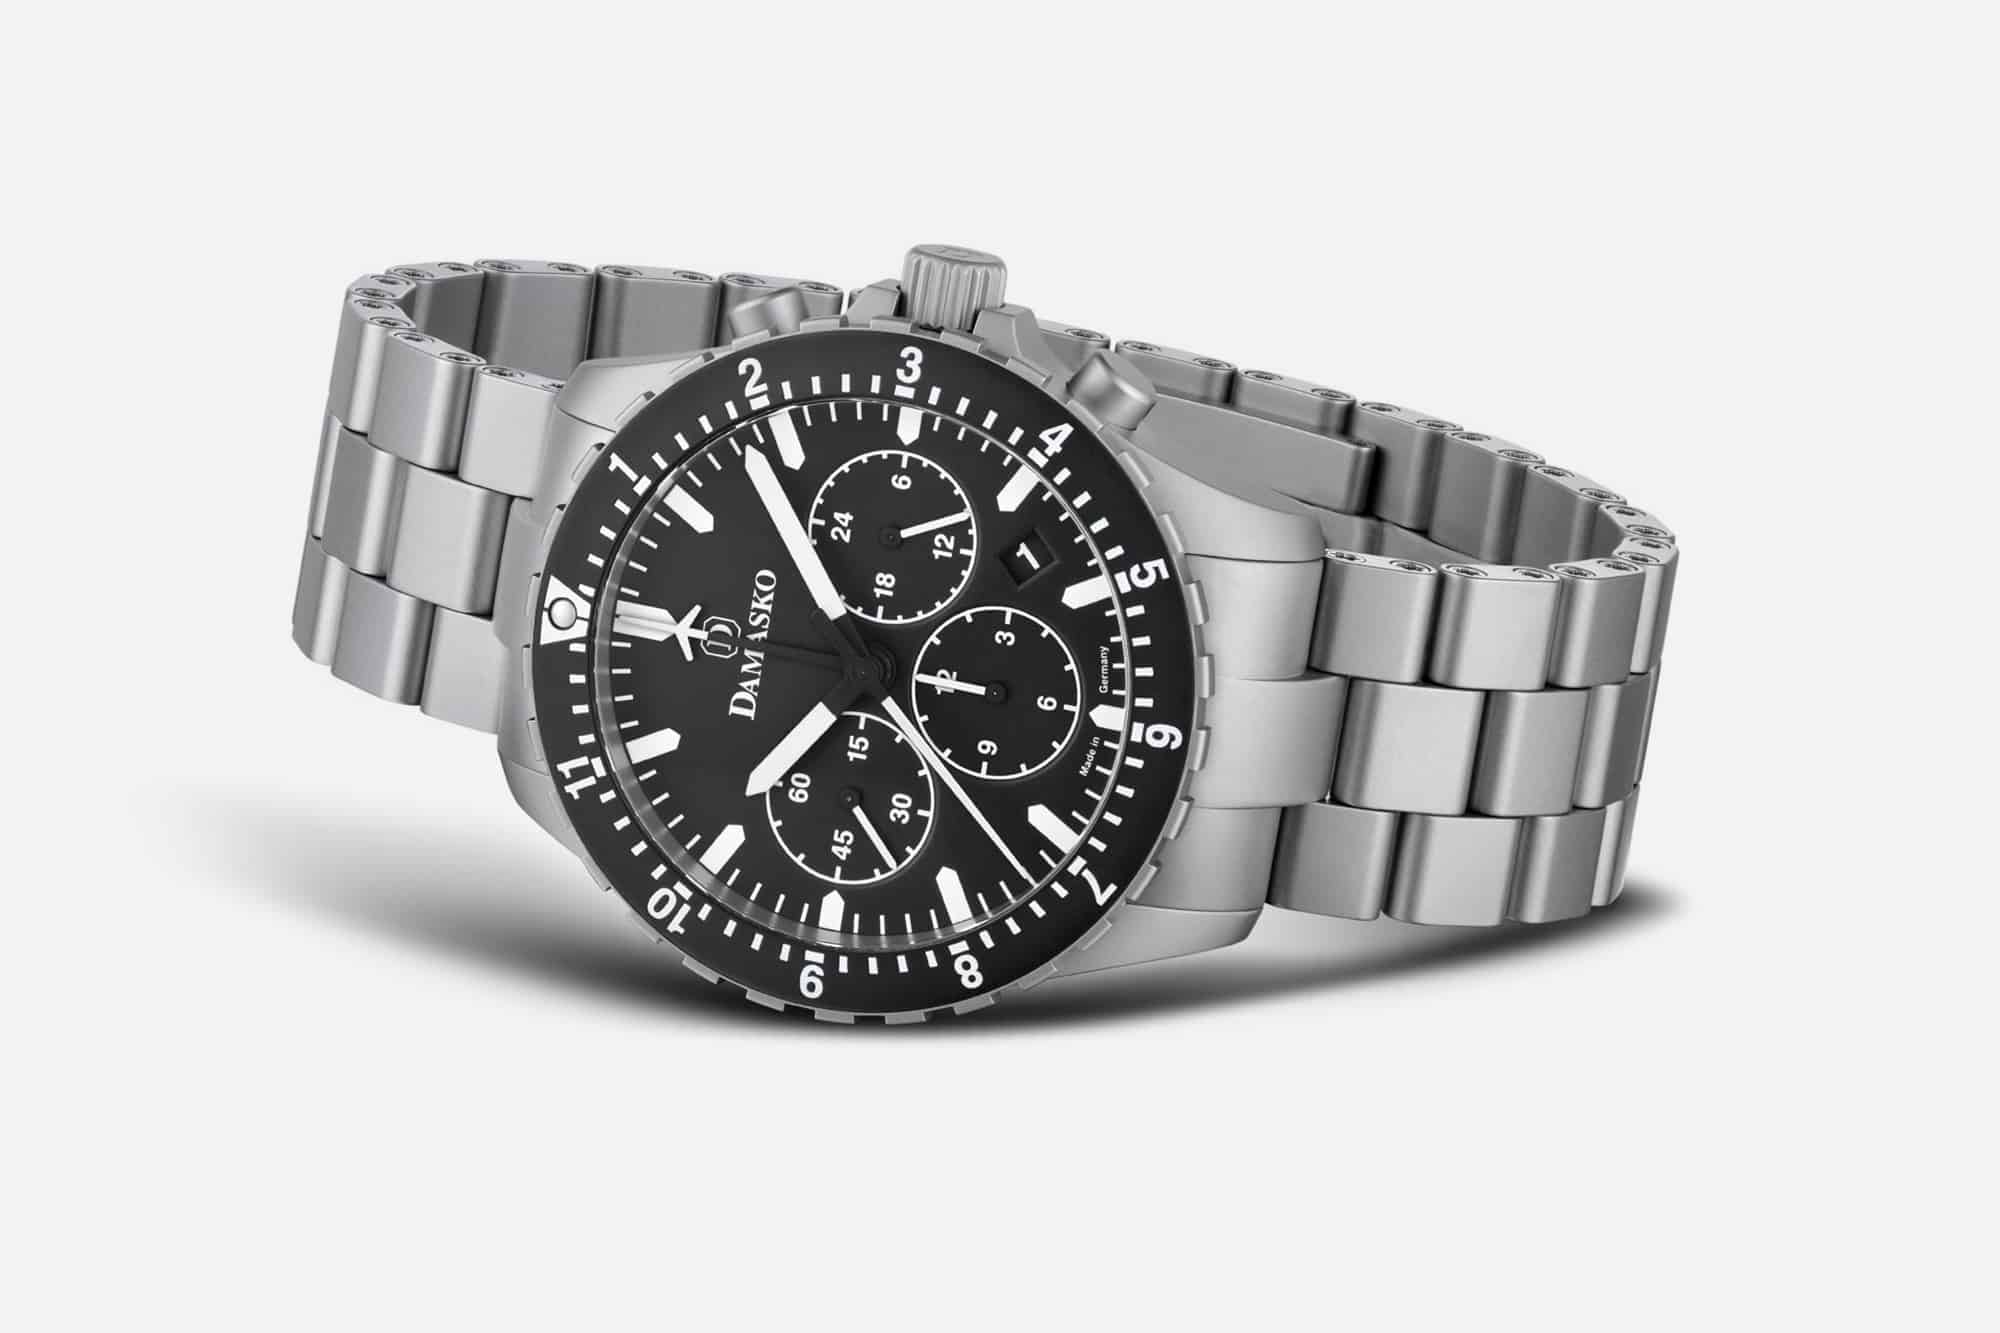 Damasko Unveils the DC86, Their Latest Indestructible Central-Minutes Chronograph